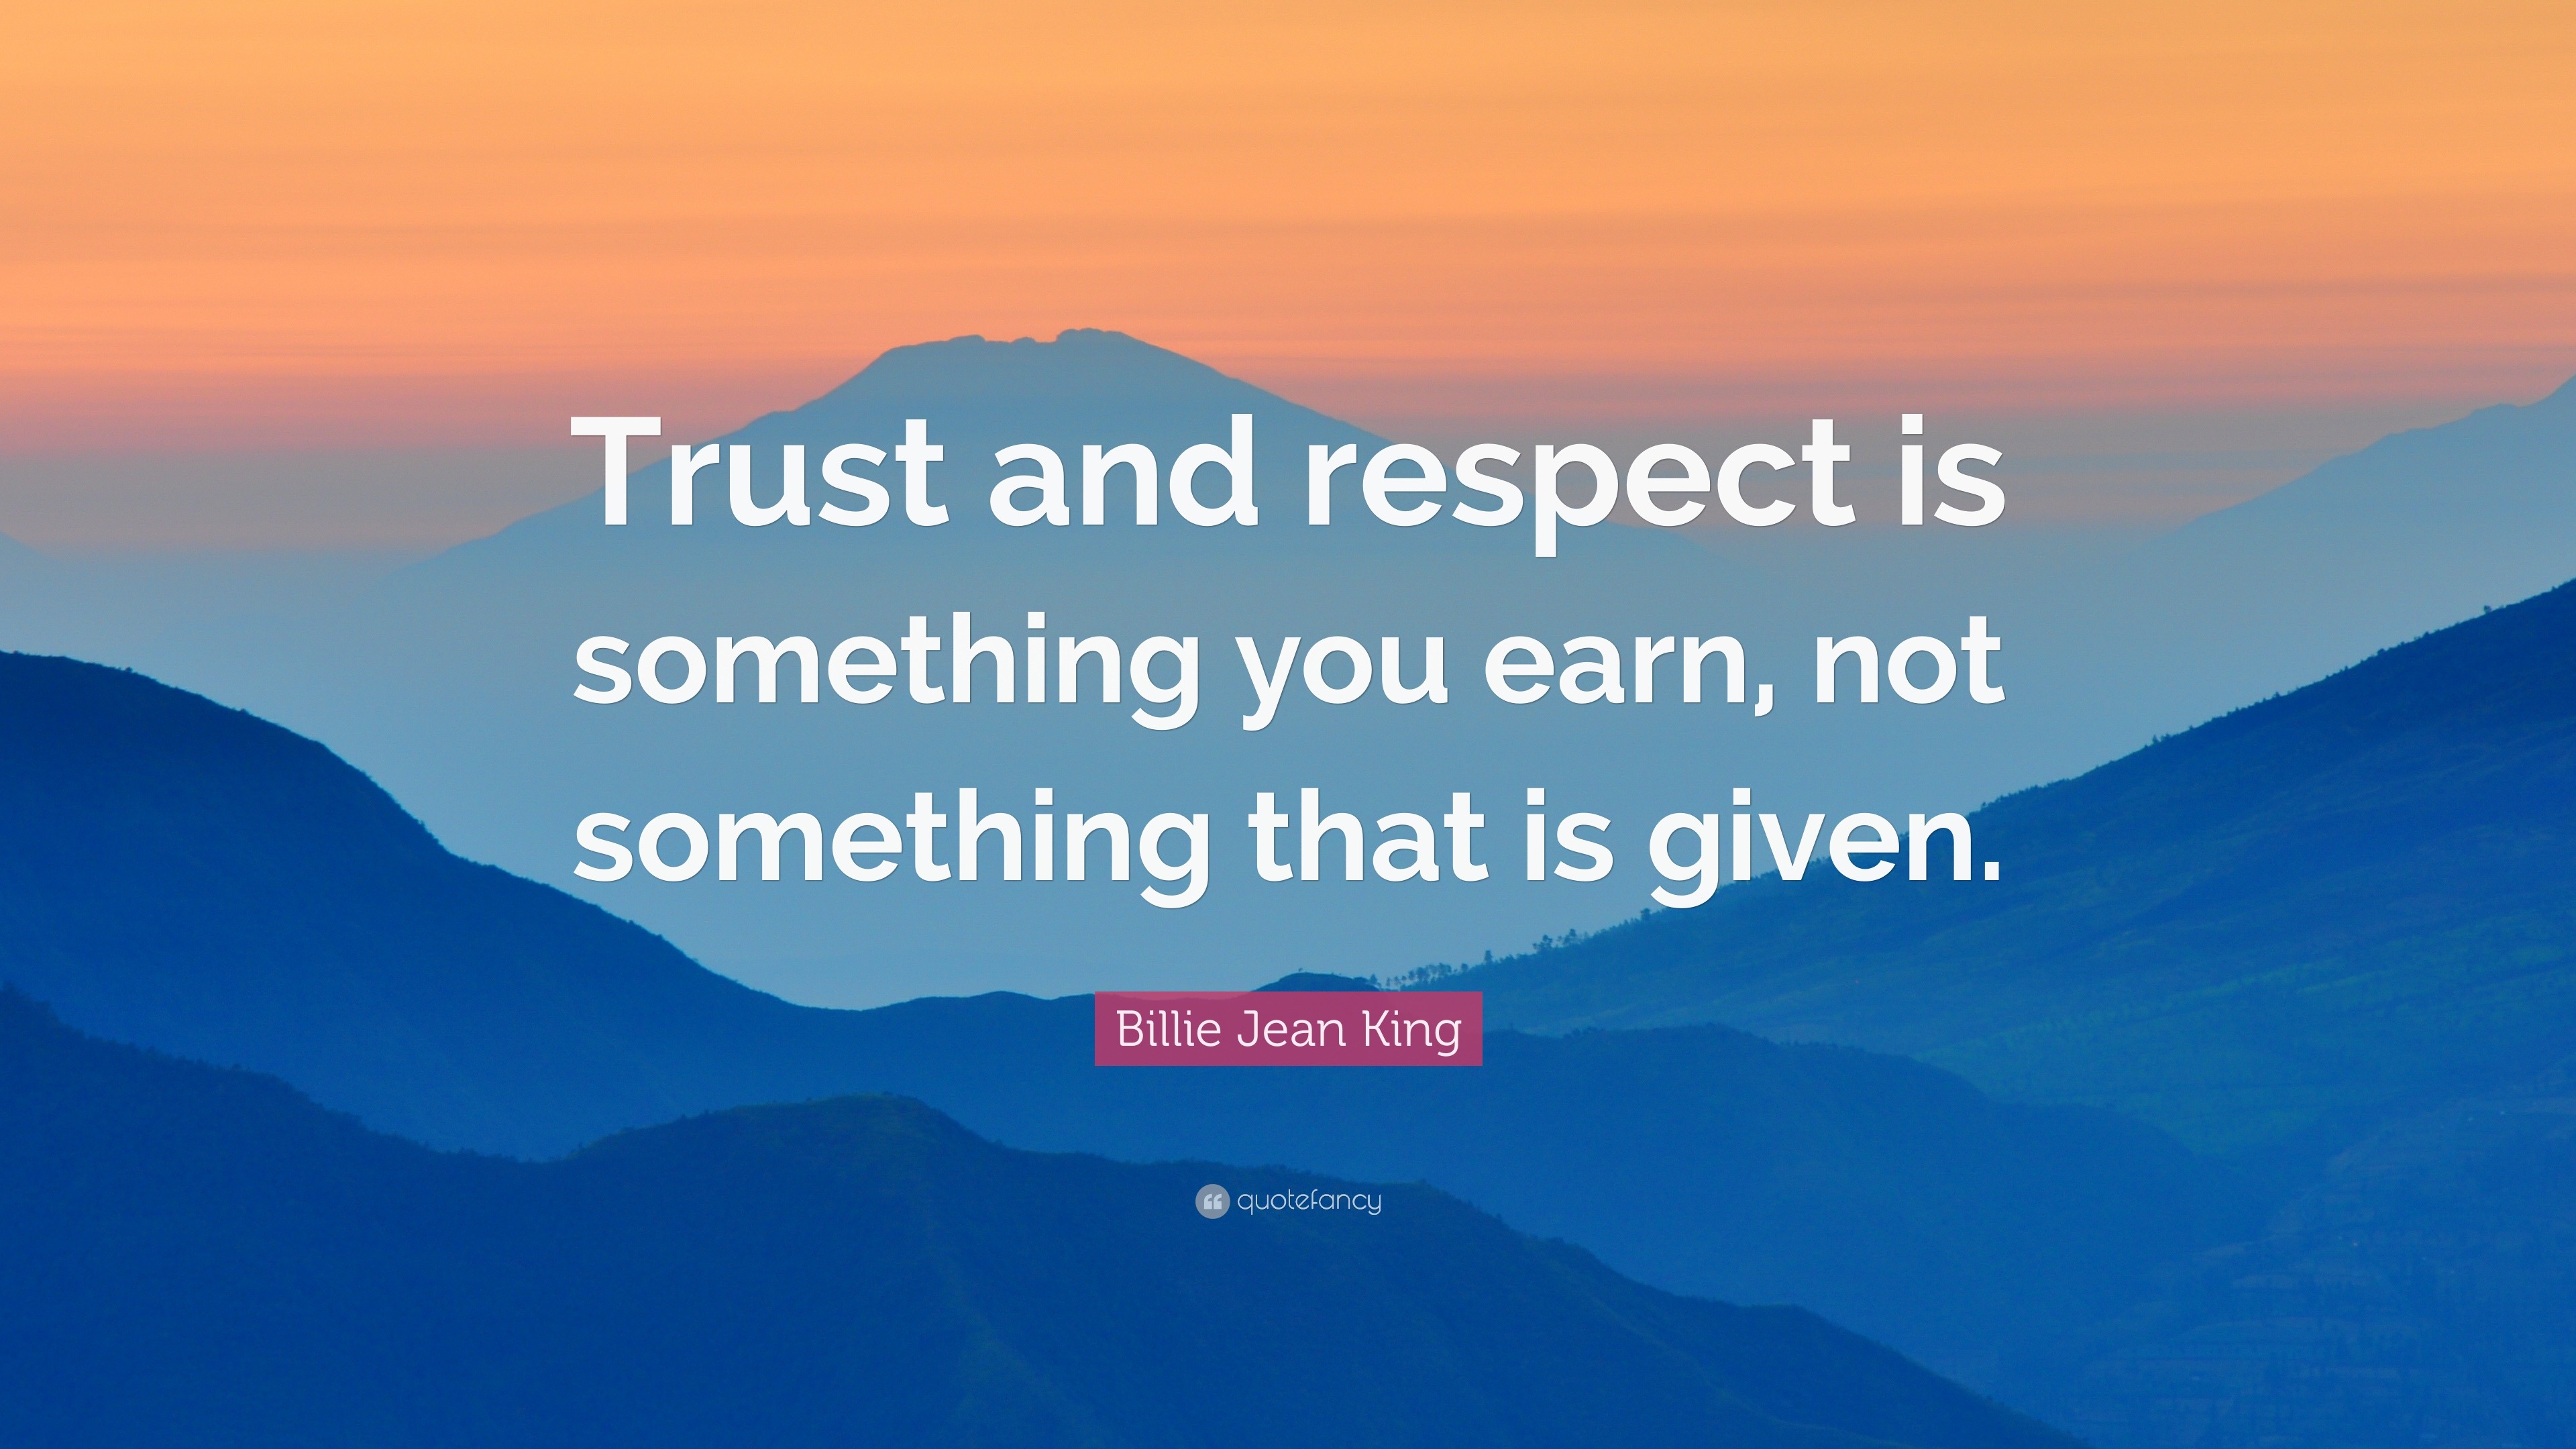 Billie Jean King Quote Trust and respect is something  